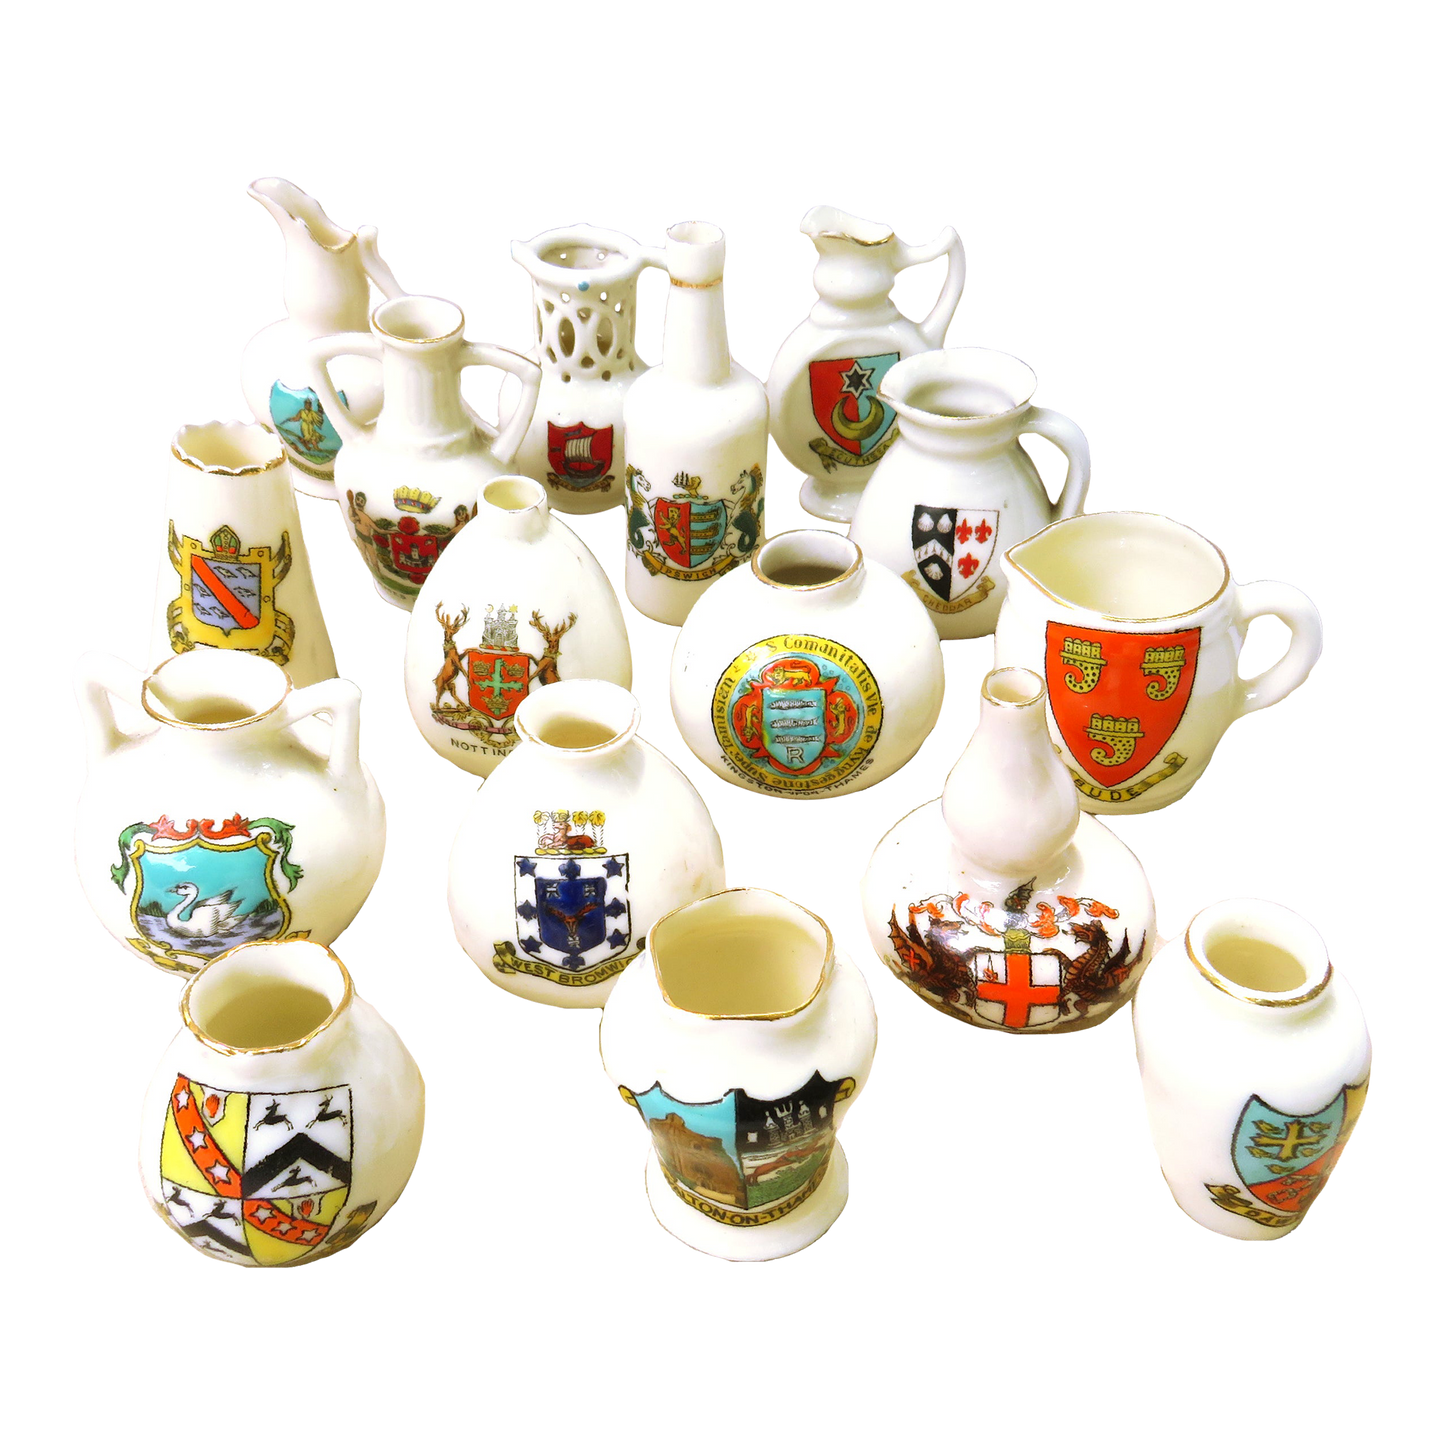 Antique English Heraldic / Crested Ware Staffordshire Miniature Porcelain Collection, Set of 16